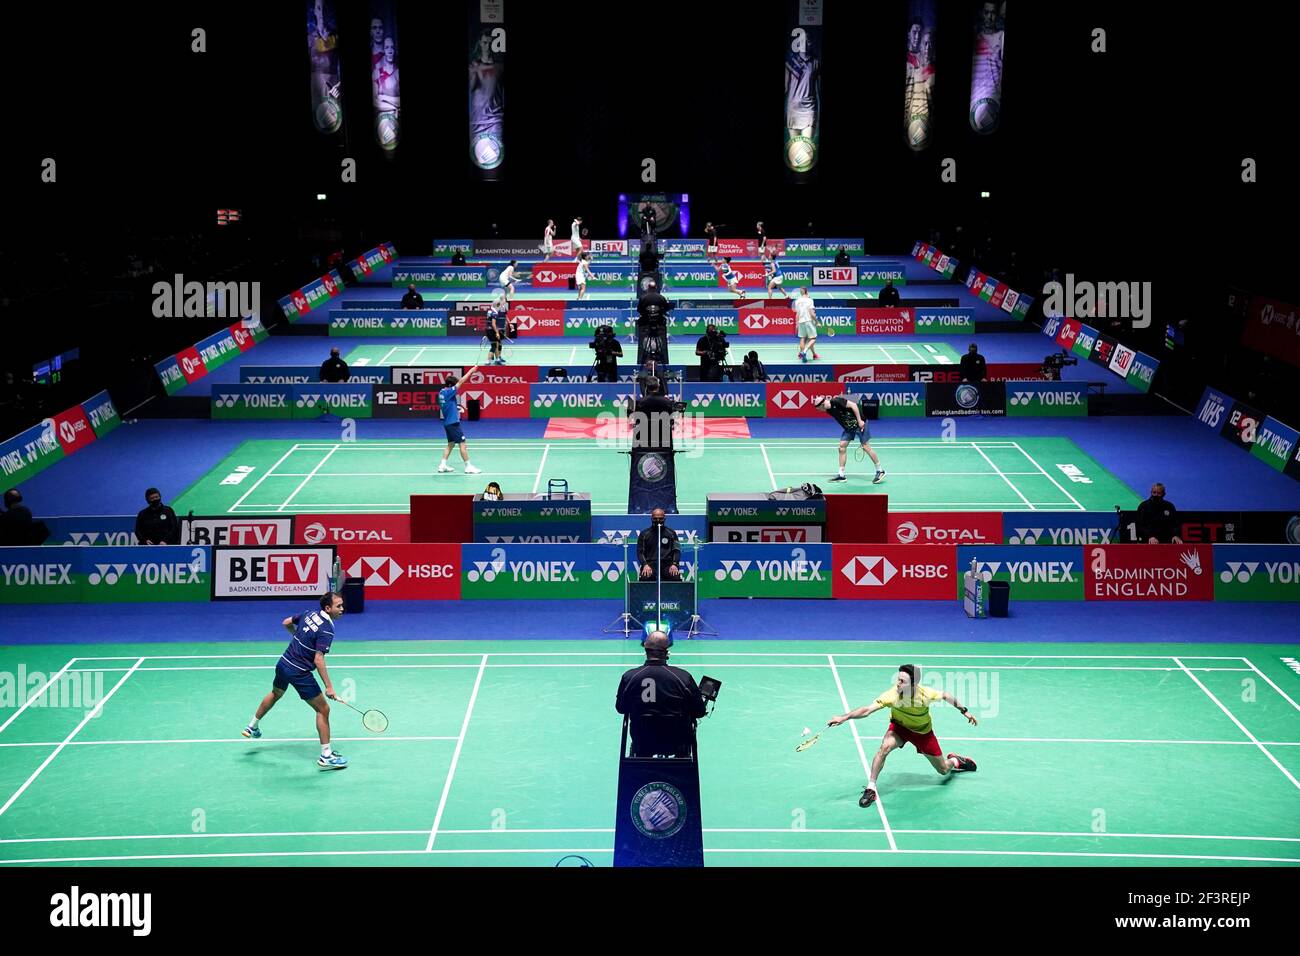 A general view of action during day one of the YONEX All England Open Badminton Championships at Utilita Arena Birmingham